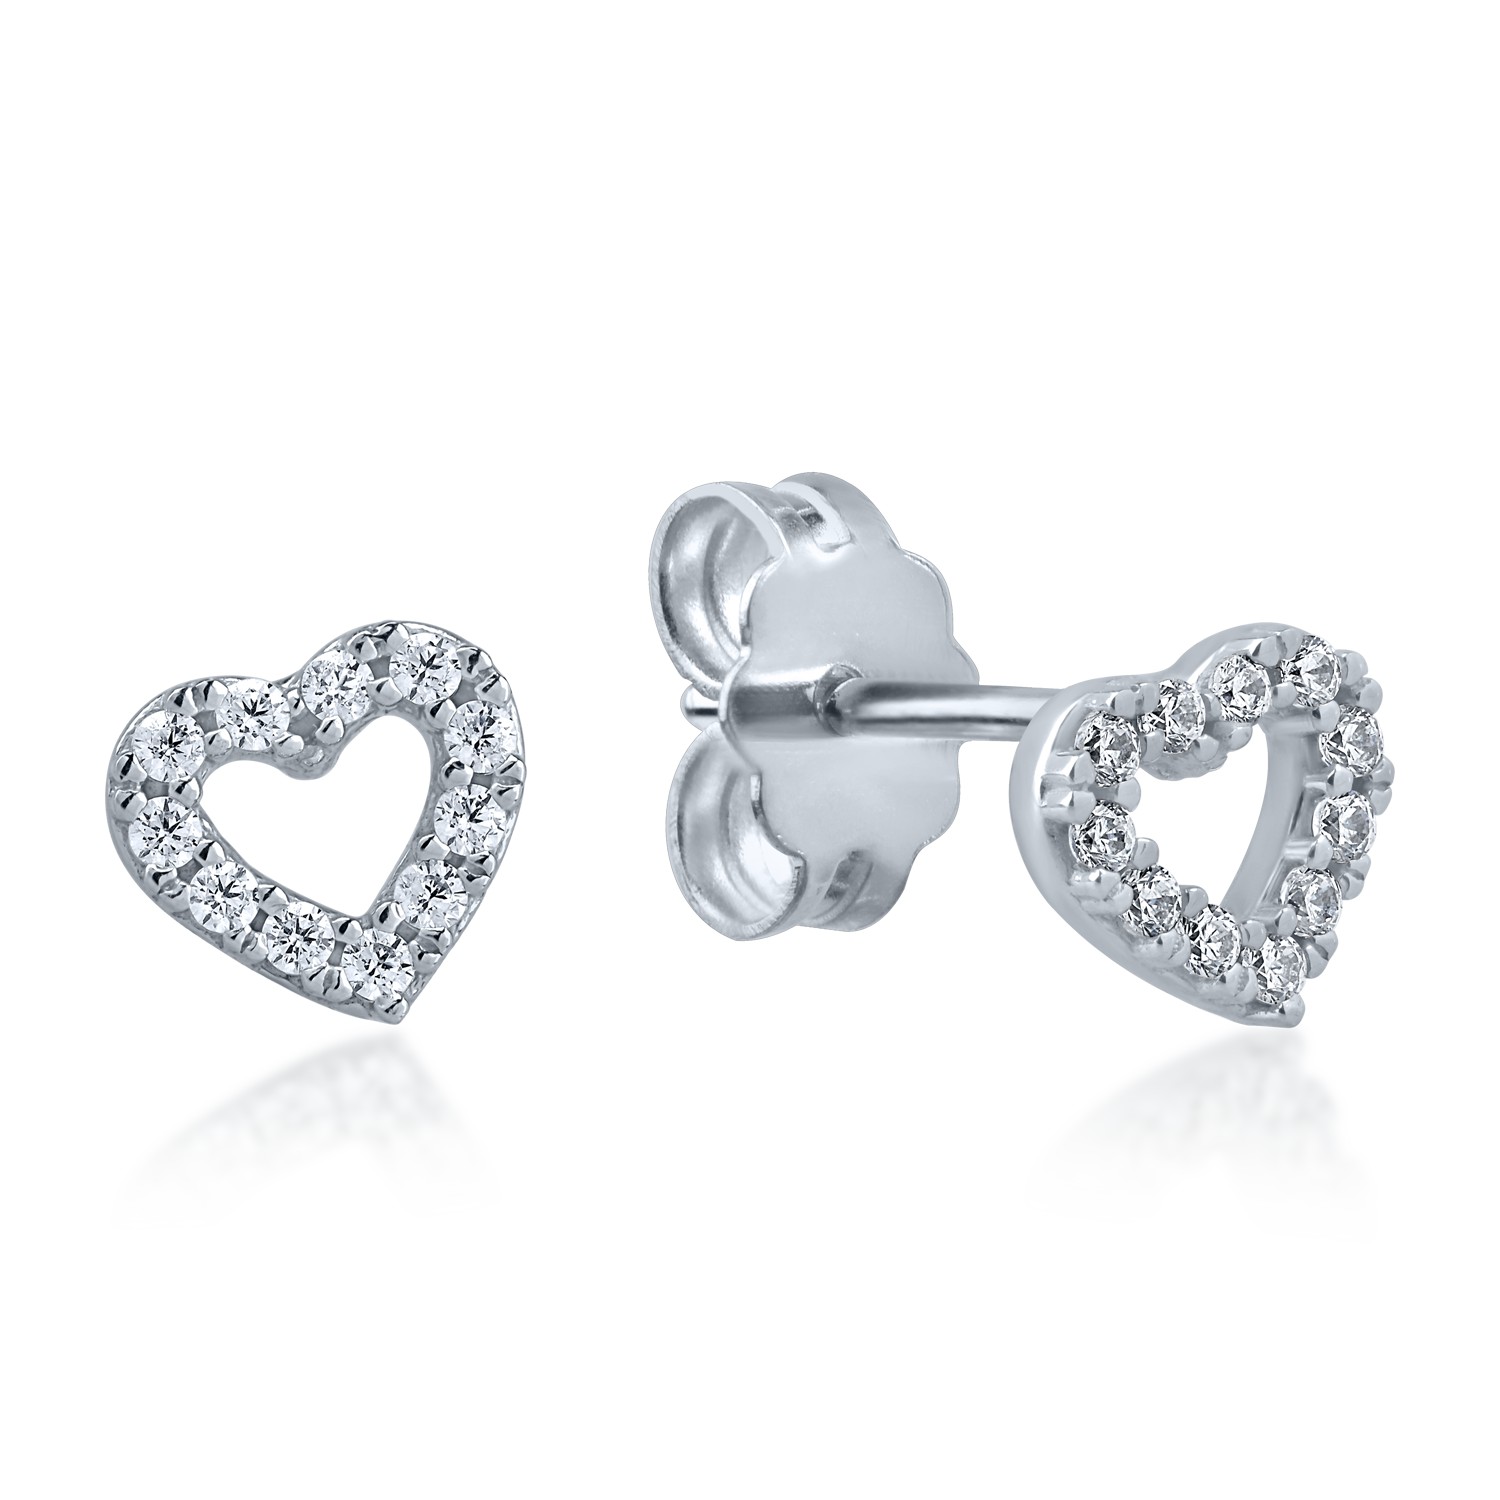 White gold heart earrings with zirconia